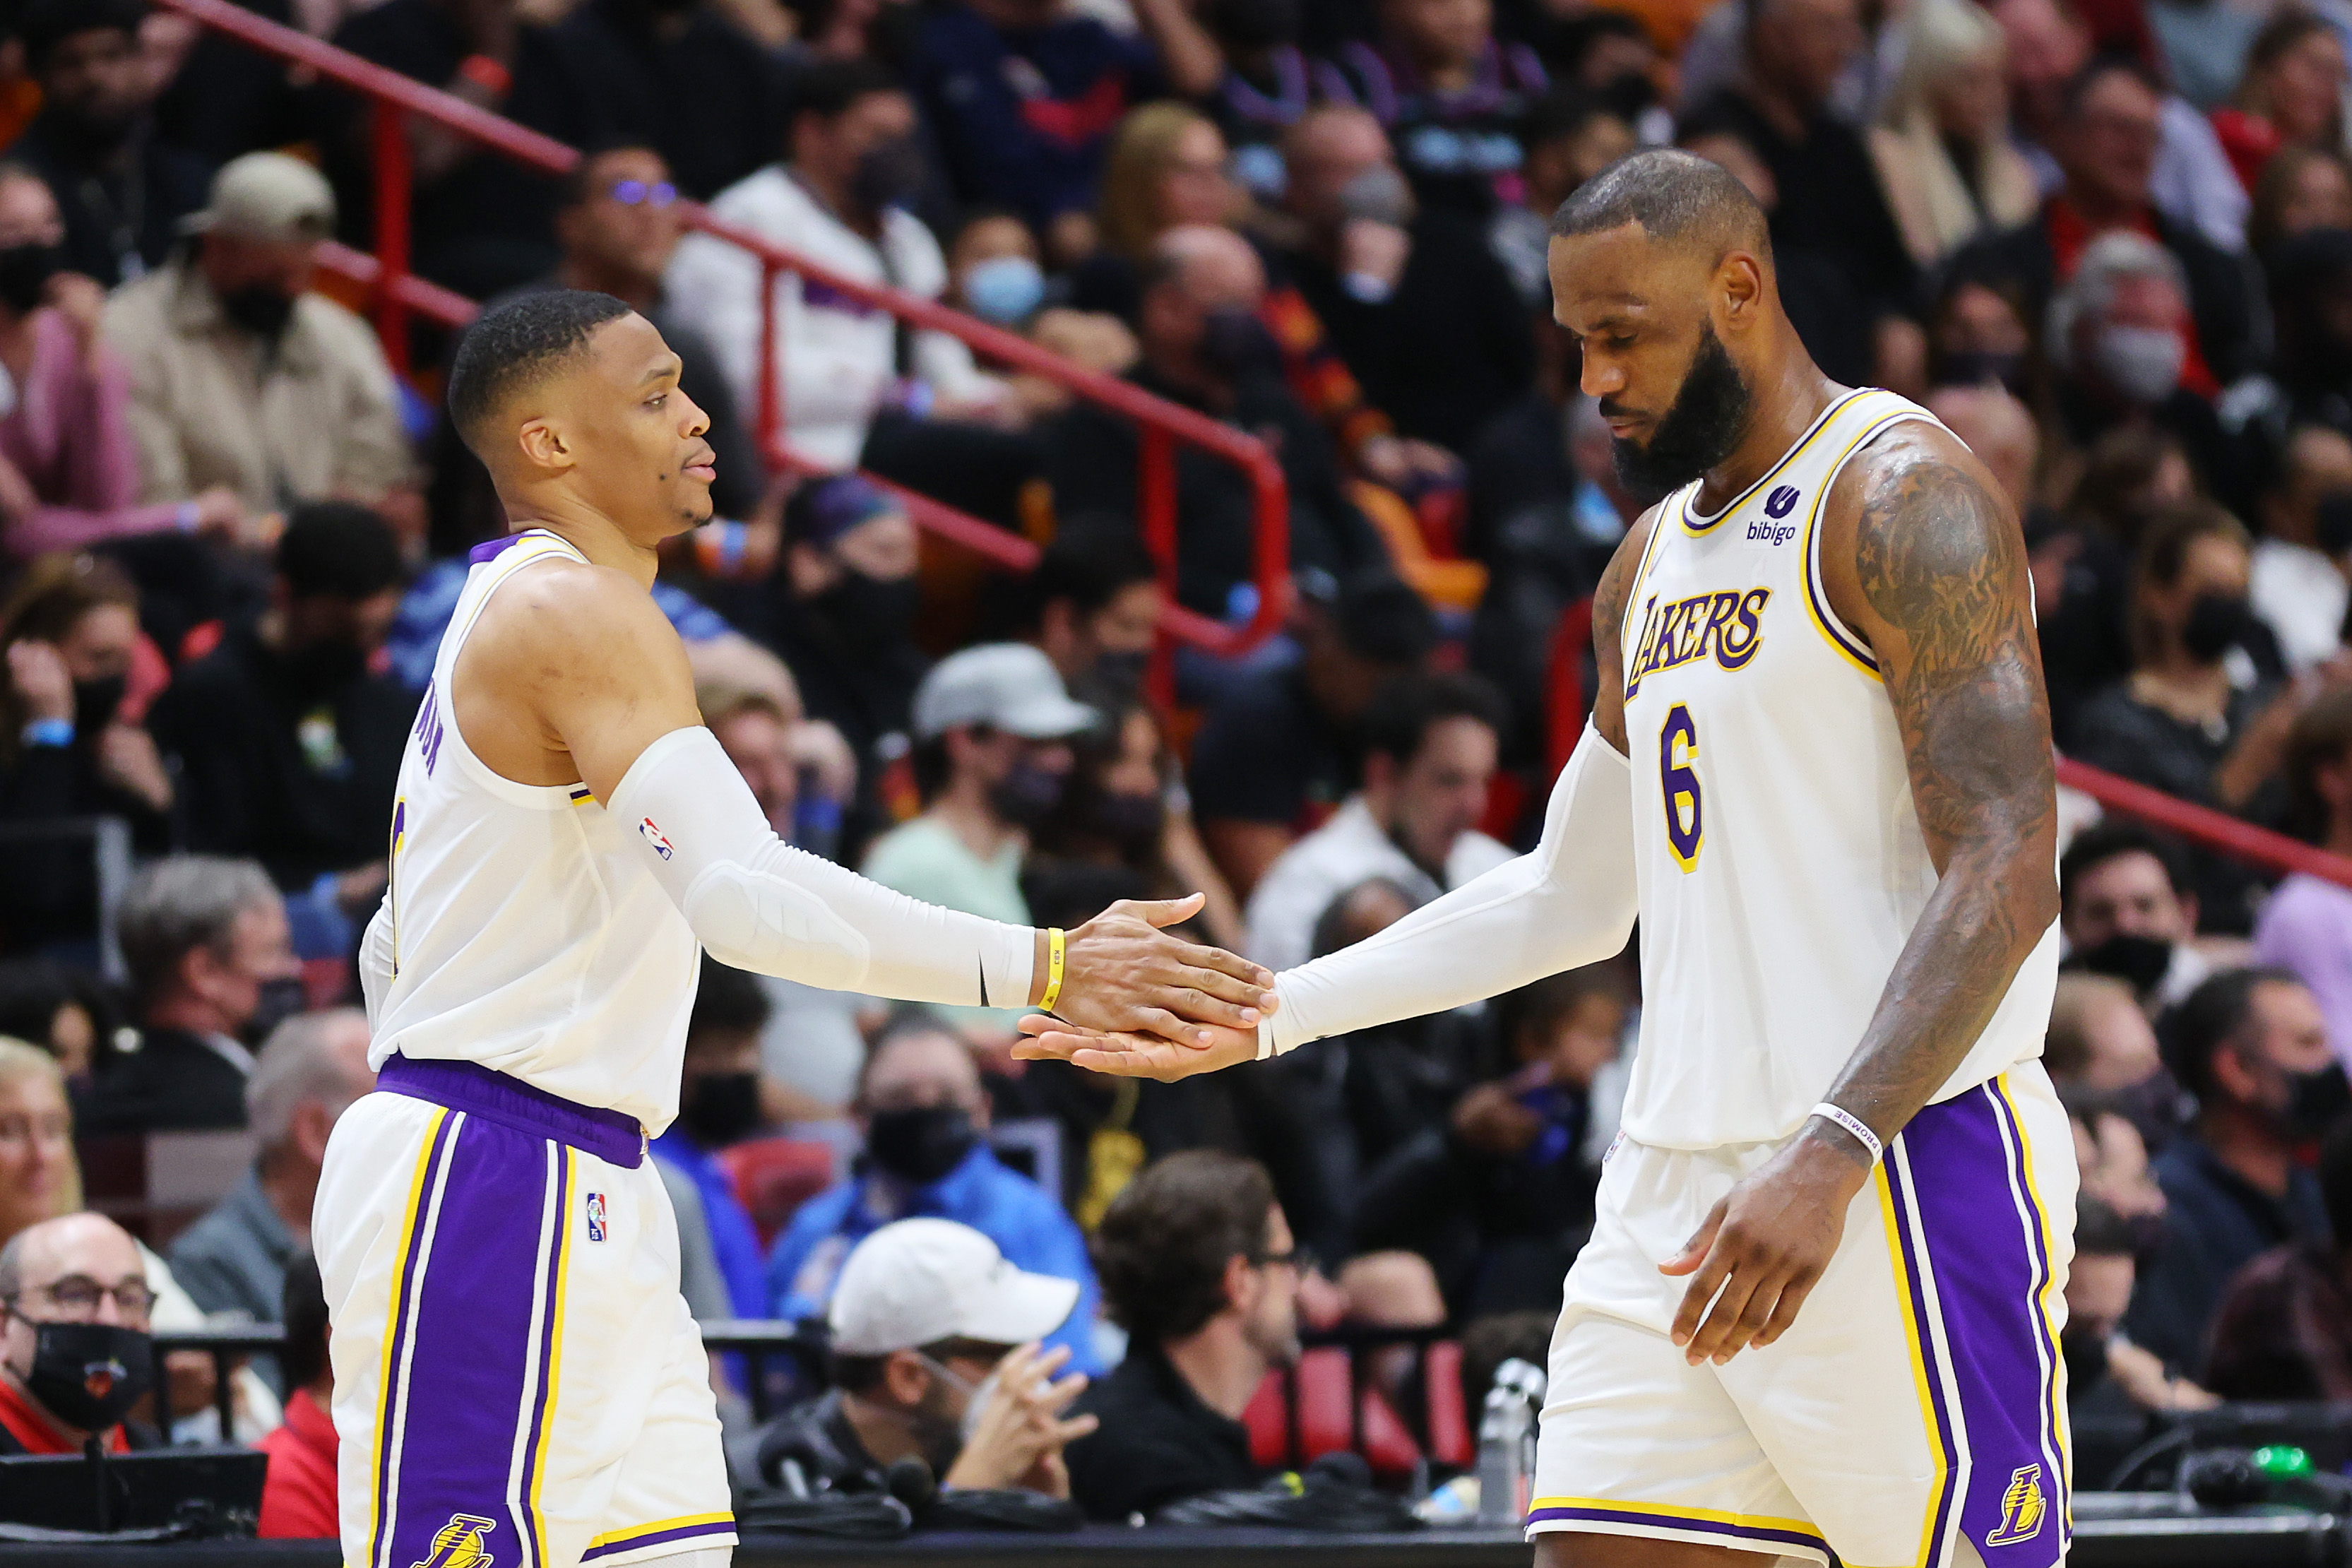 Los Angeles Lakers stars LeBron James (R) and Russell Westbrook high-five during an NBA game against the Miami Heat in January 2022